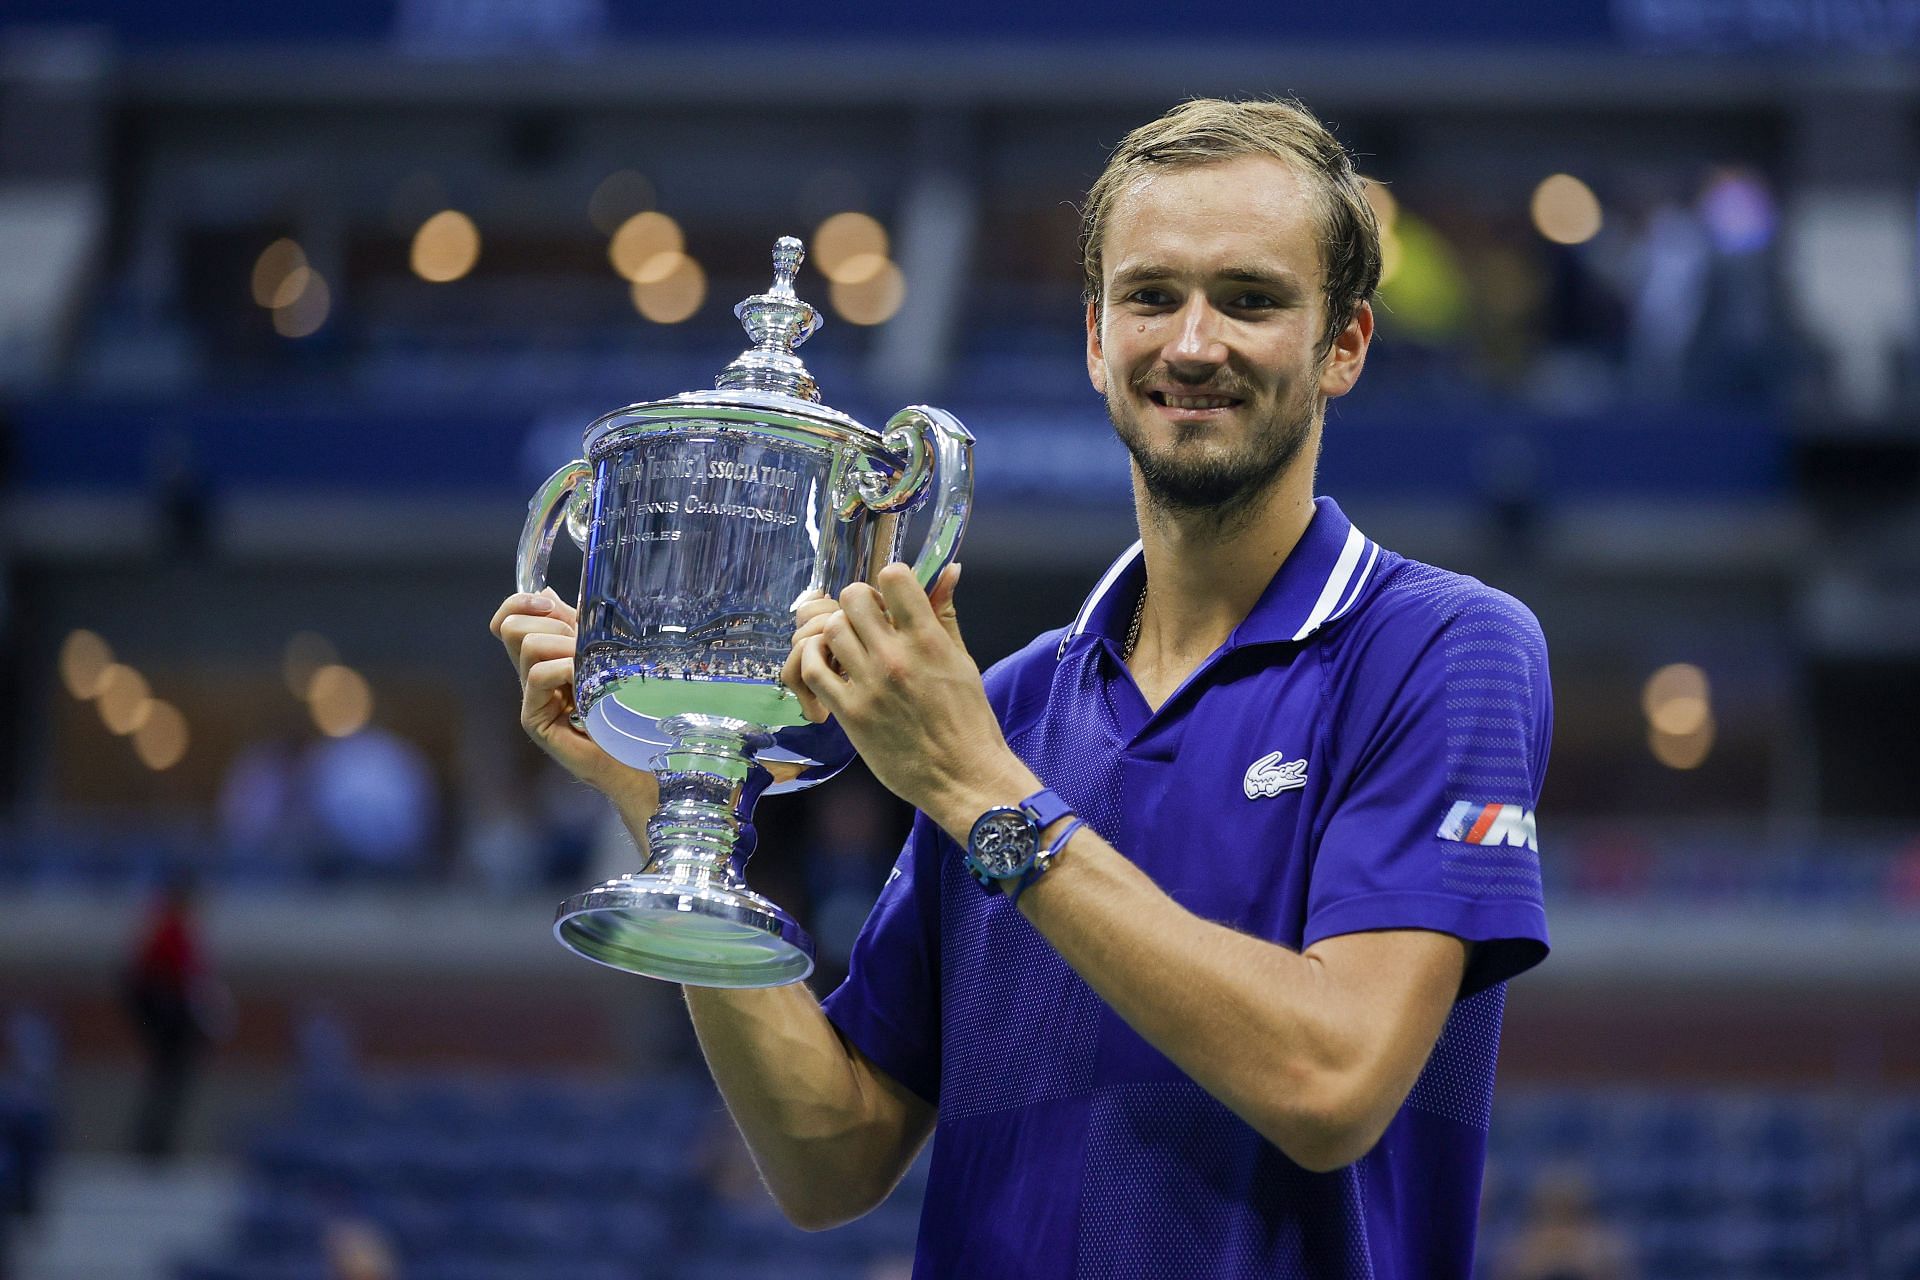 Daniil Medvedev at the 2021 US Open - Day 14